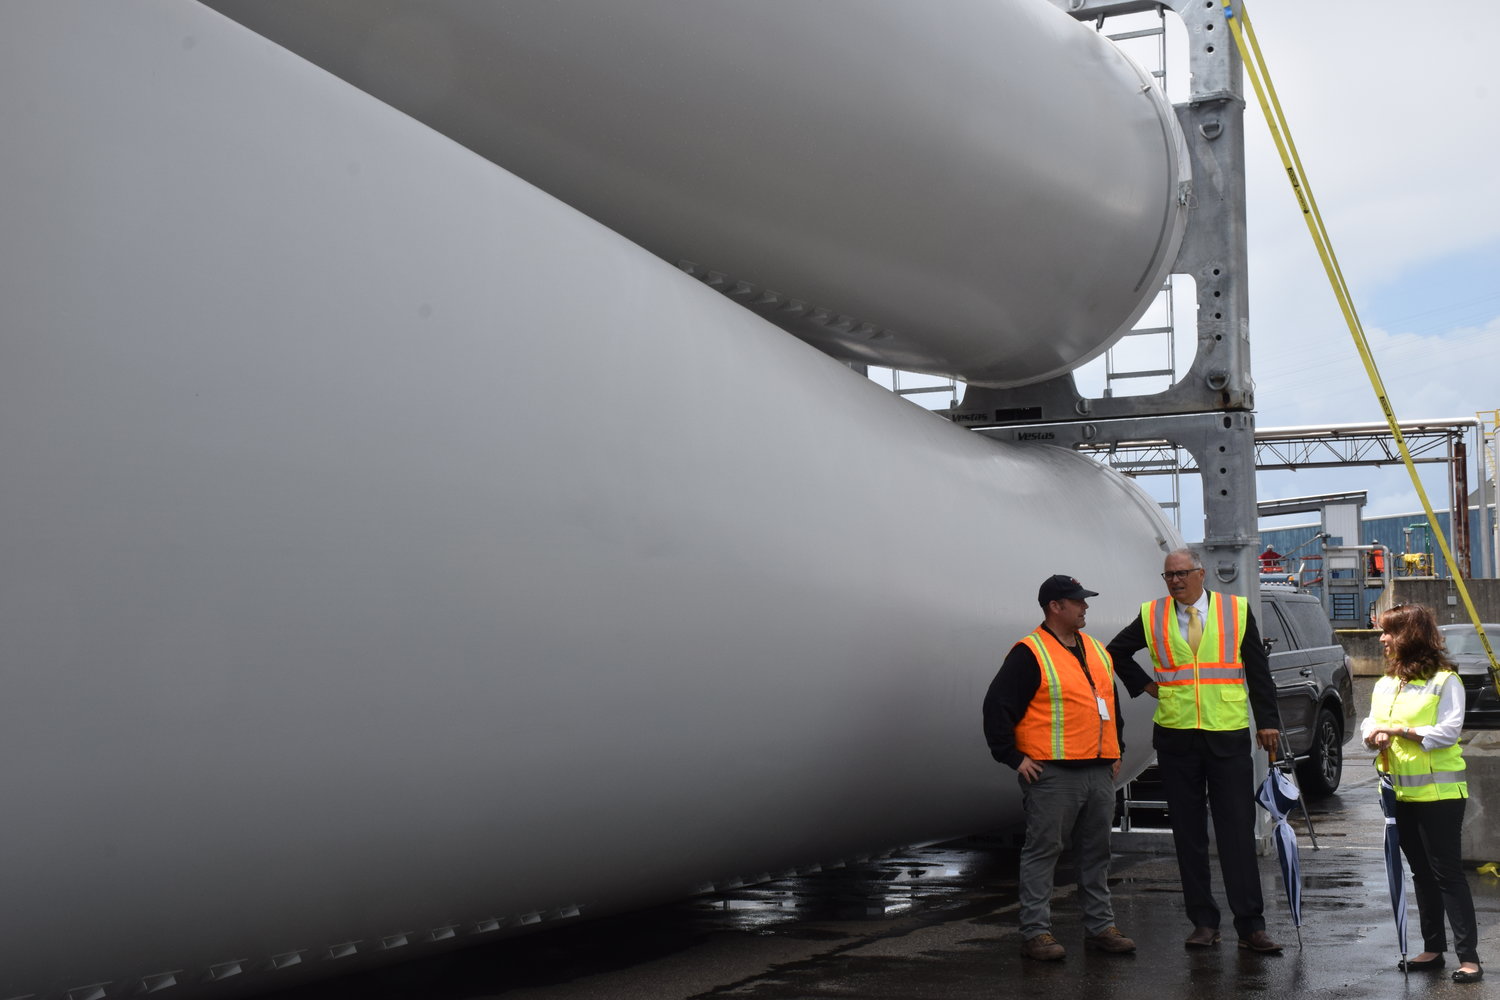 Gov. Jay Inslee see the arrival of wind turbine components earlier this year in Clark County.